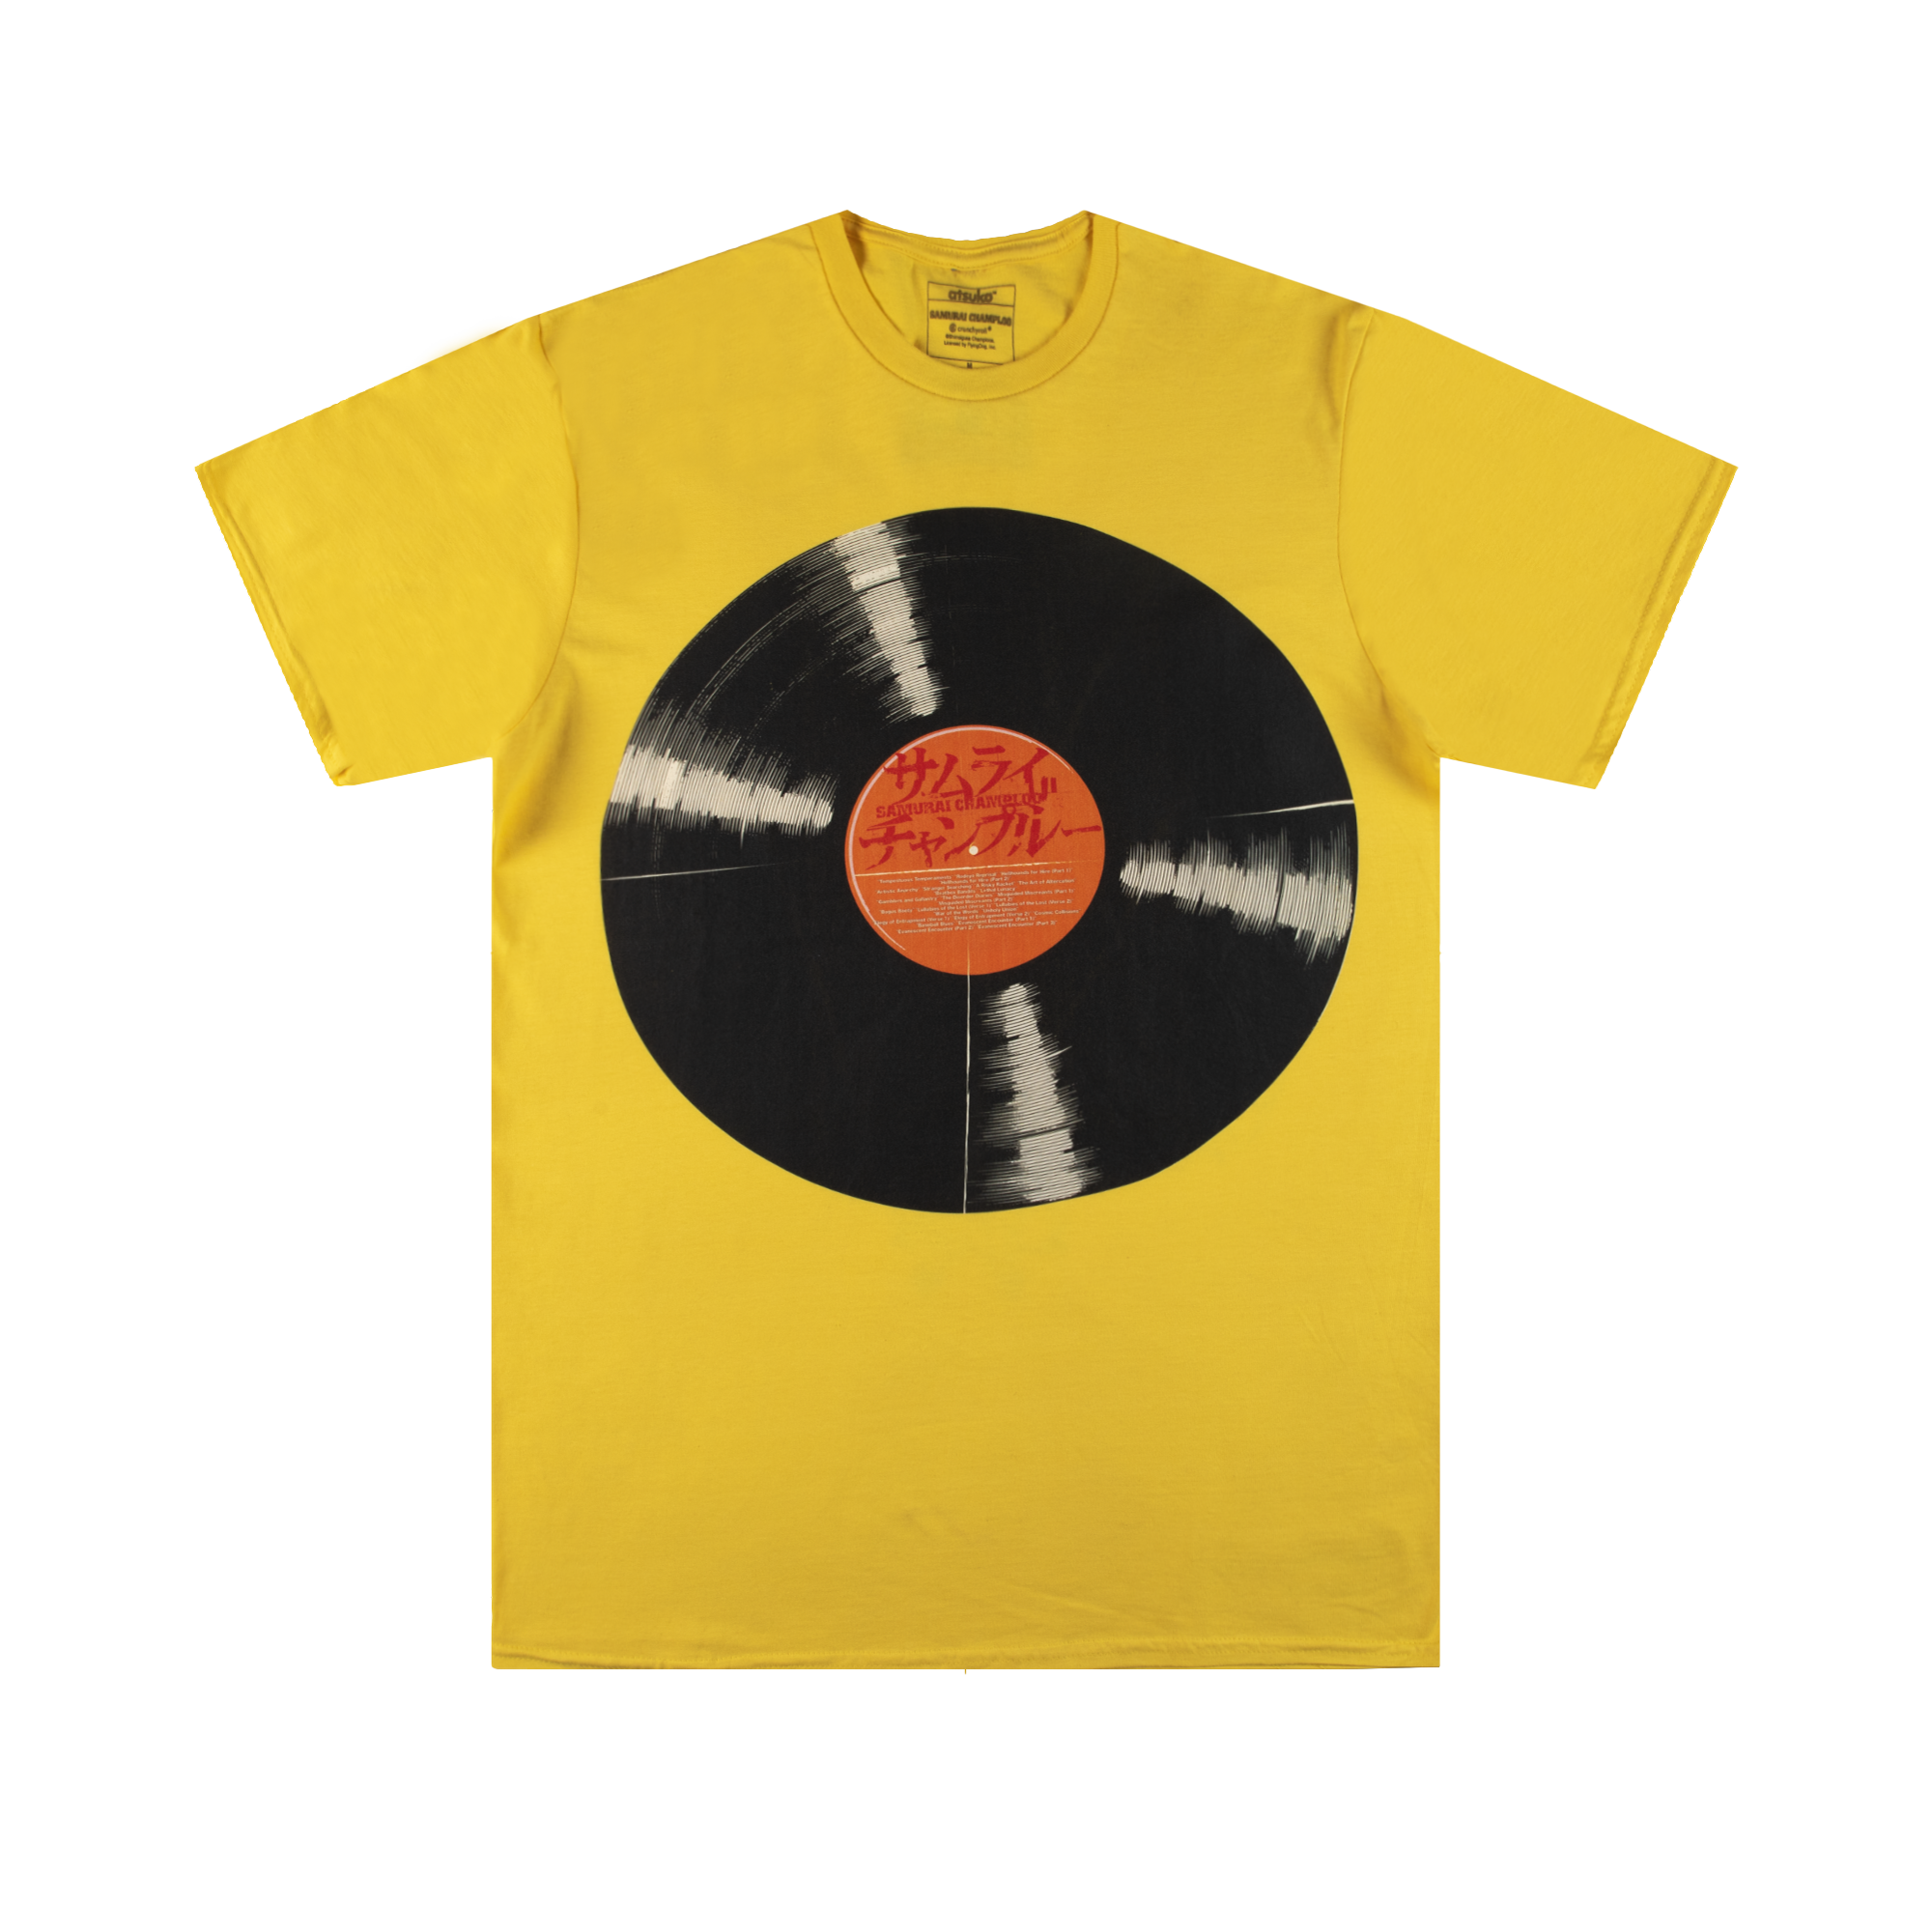 Soundtrack Of Outlaws Yellow Tee